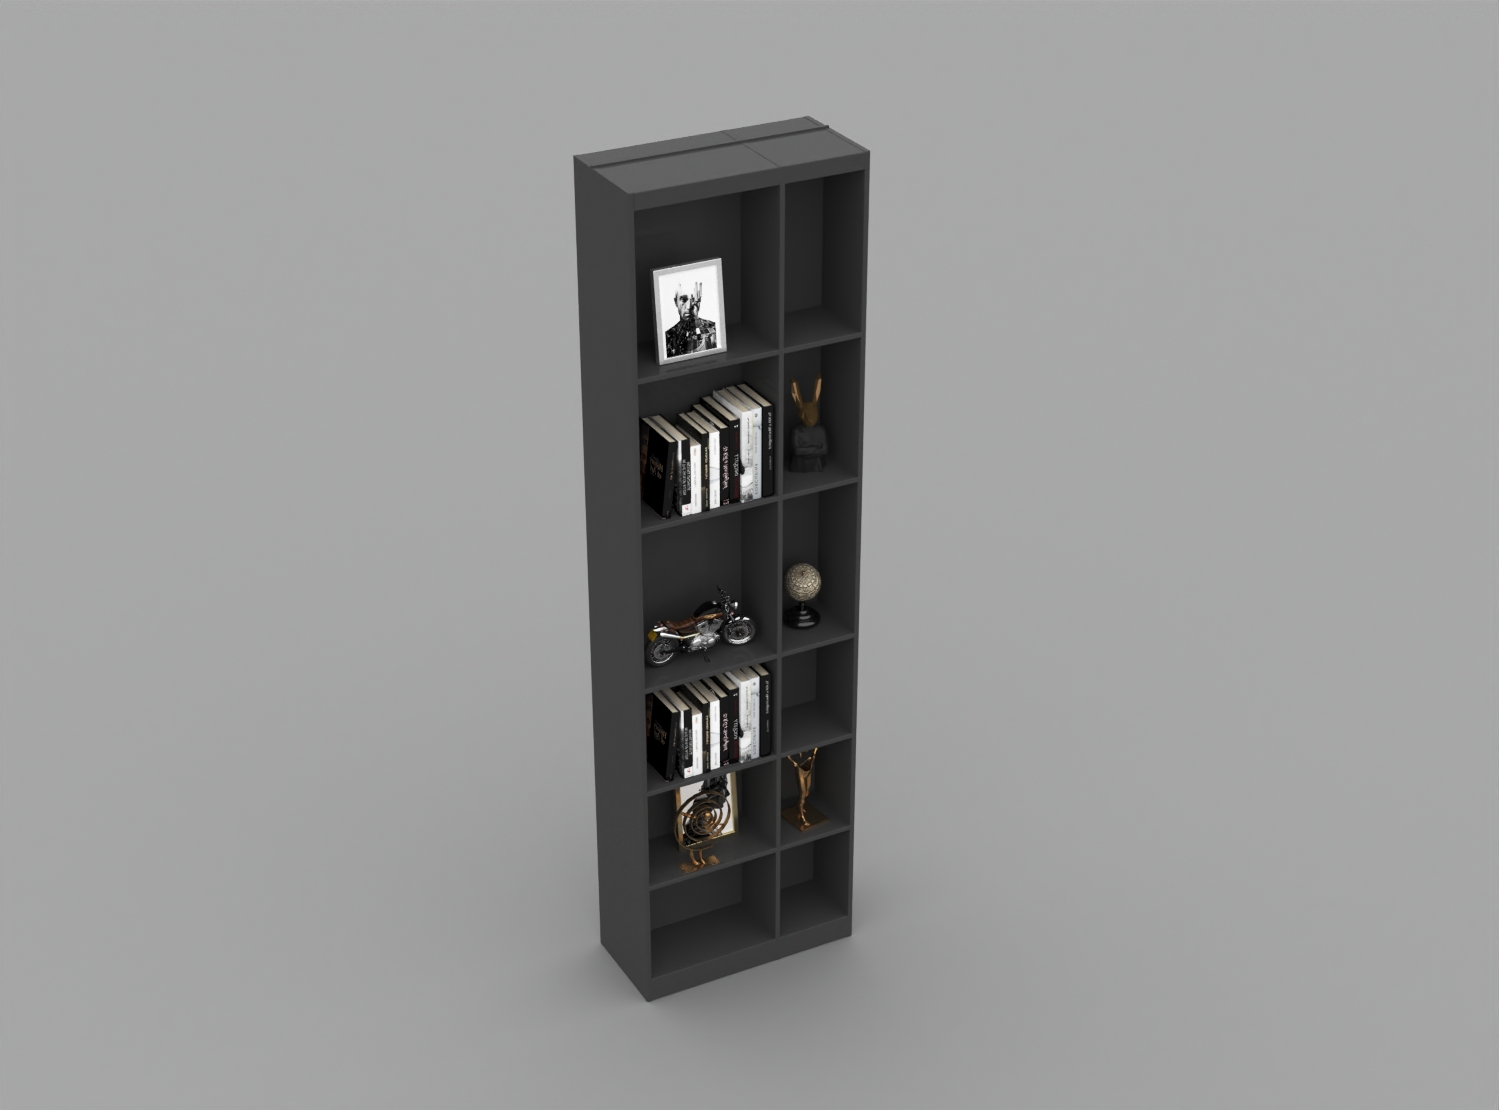 645. Download Free Display Cabinets Model By Jes Mccartney